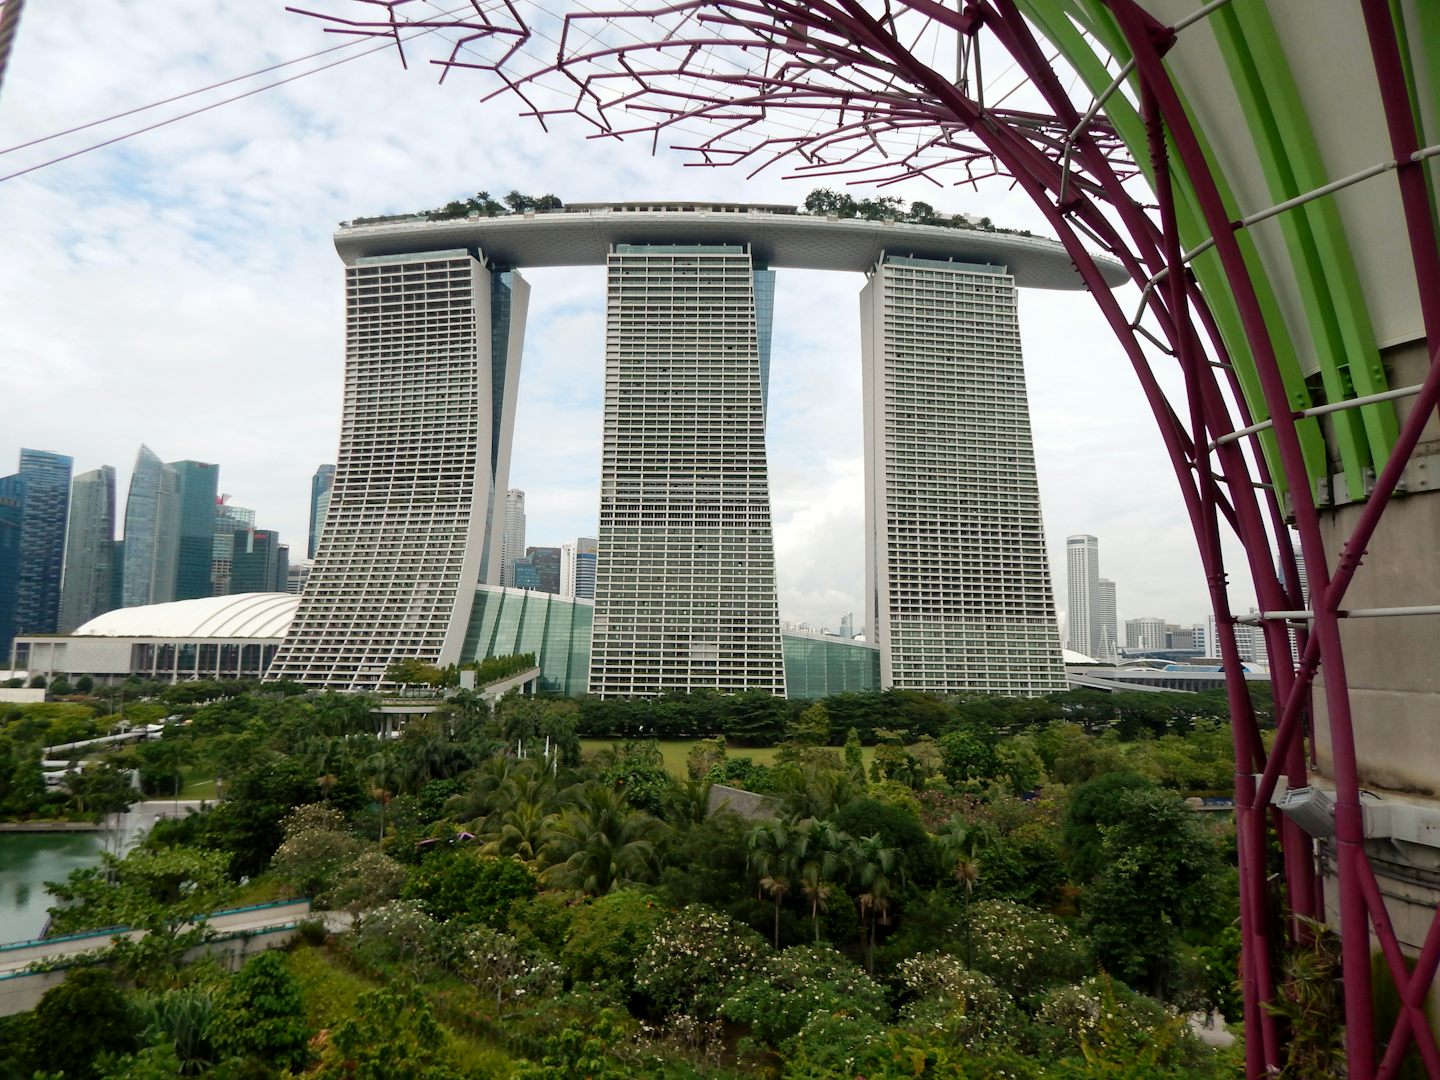 Marina Bay Sands from the Gardens by the Bay